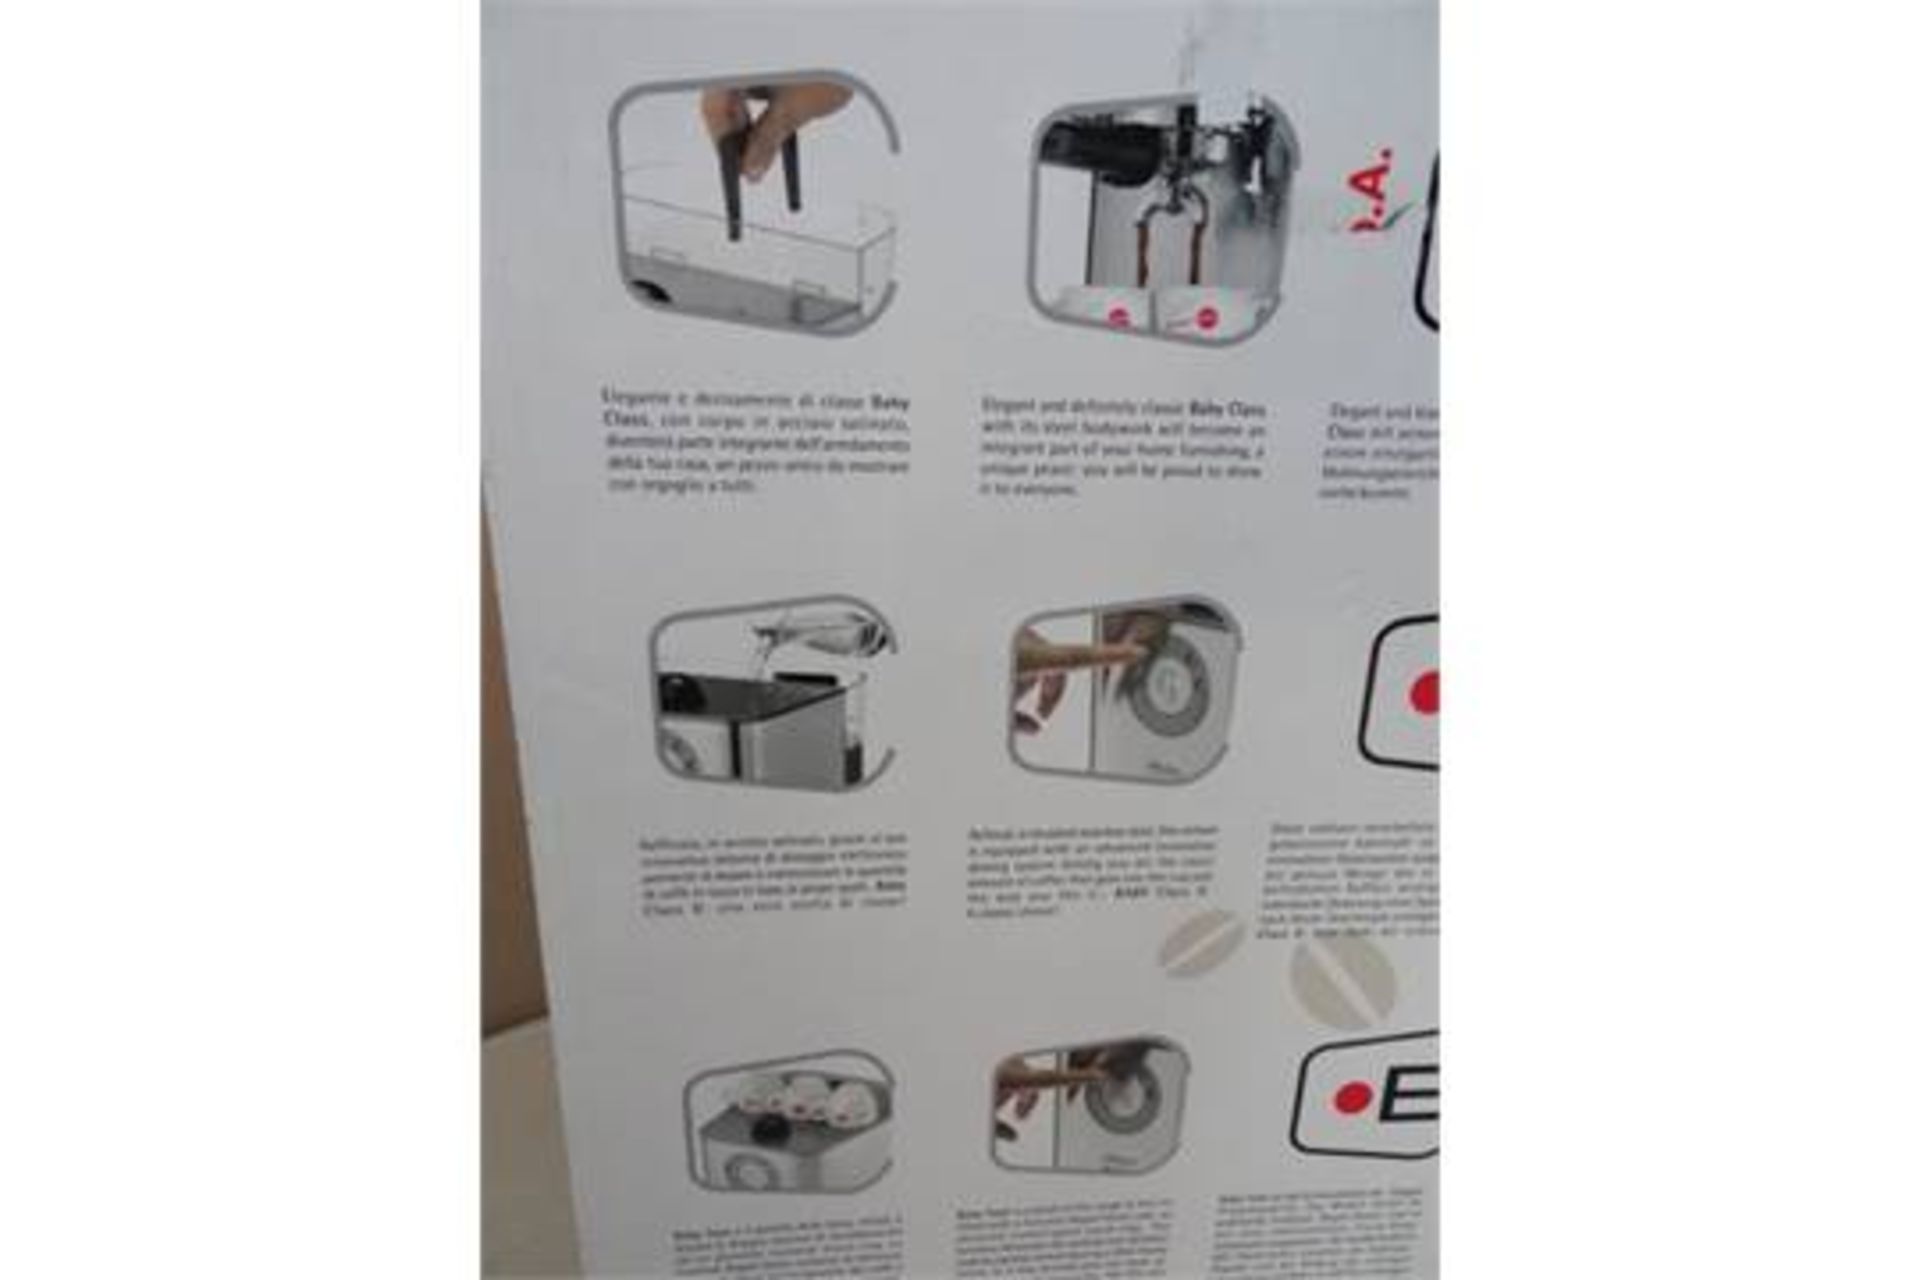 1 x Gaggia Twin Baby Class R18157/40 Manual Coffee Machine. •Dimensions: 24.5x40x26.5cm
•Material: - Image 2 of 2